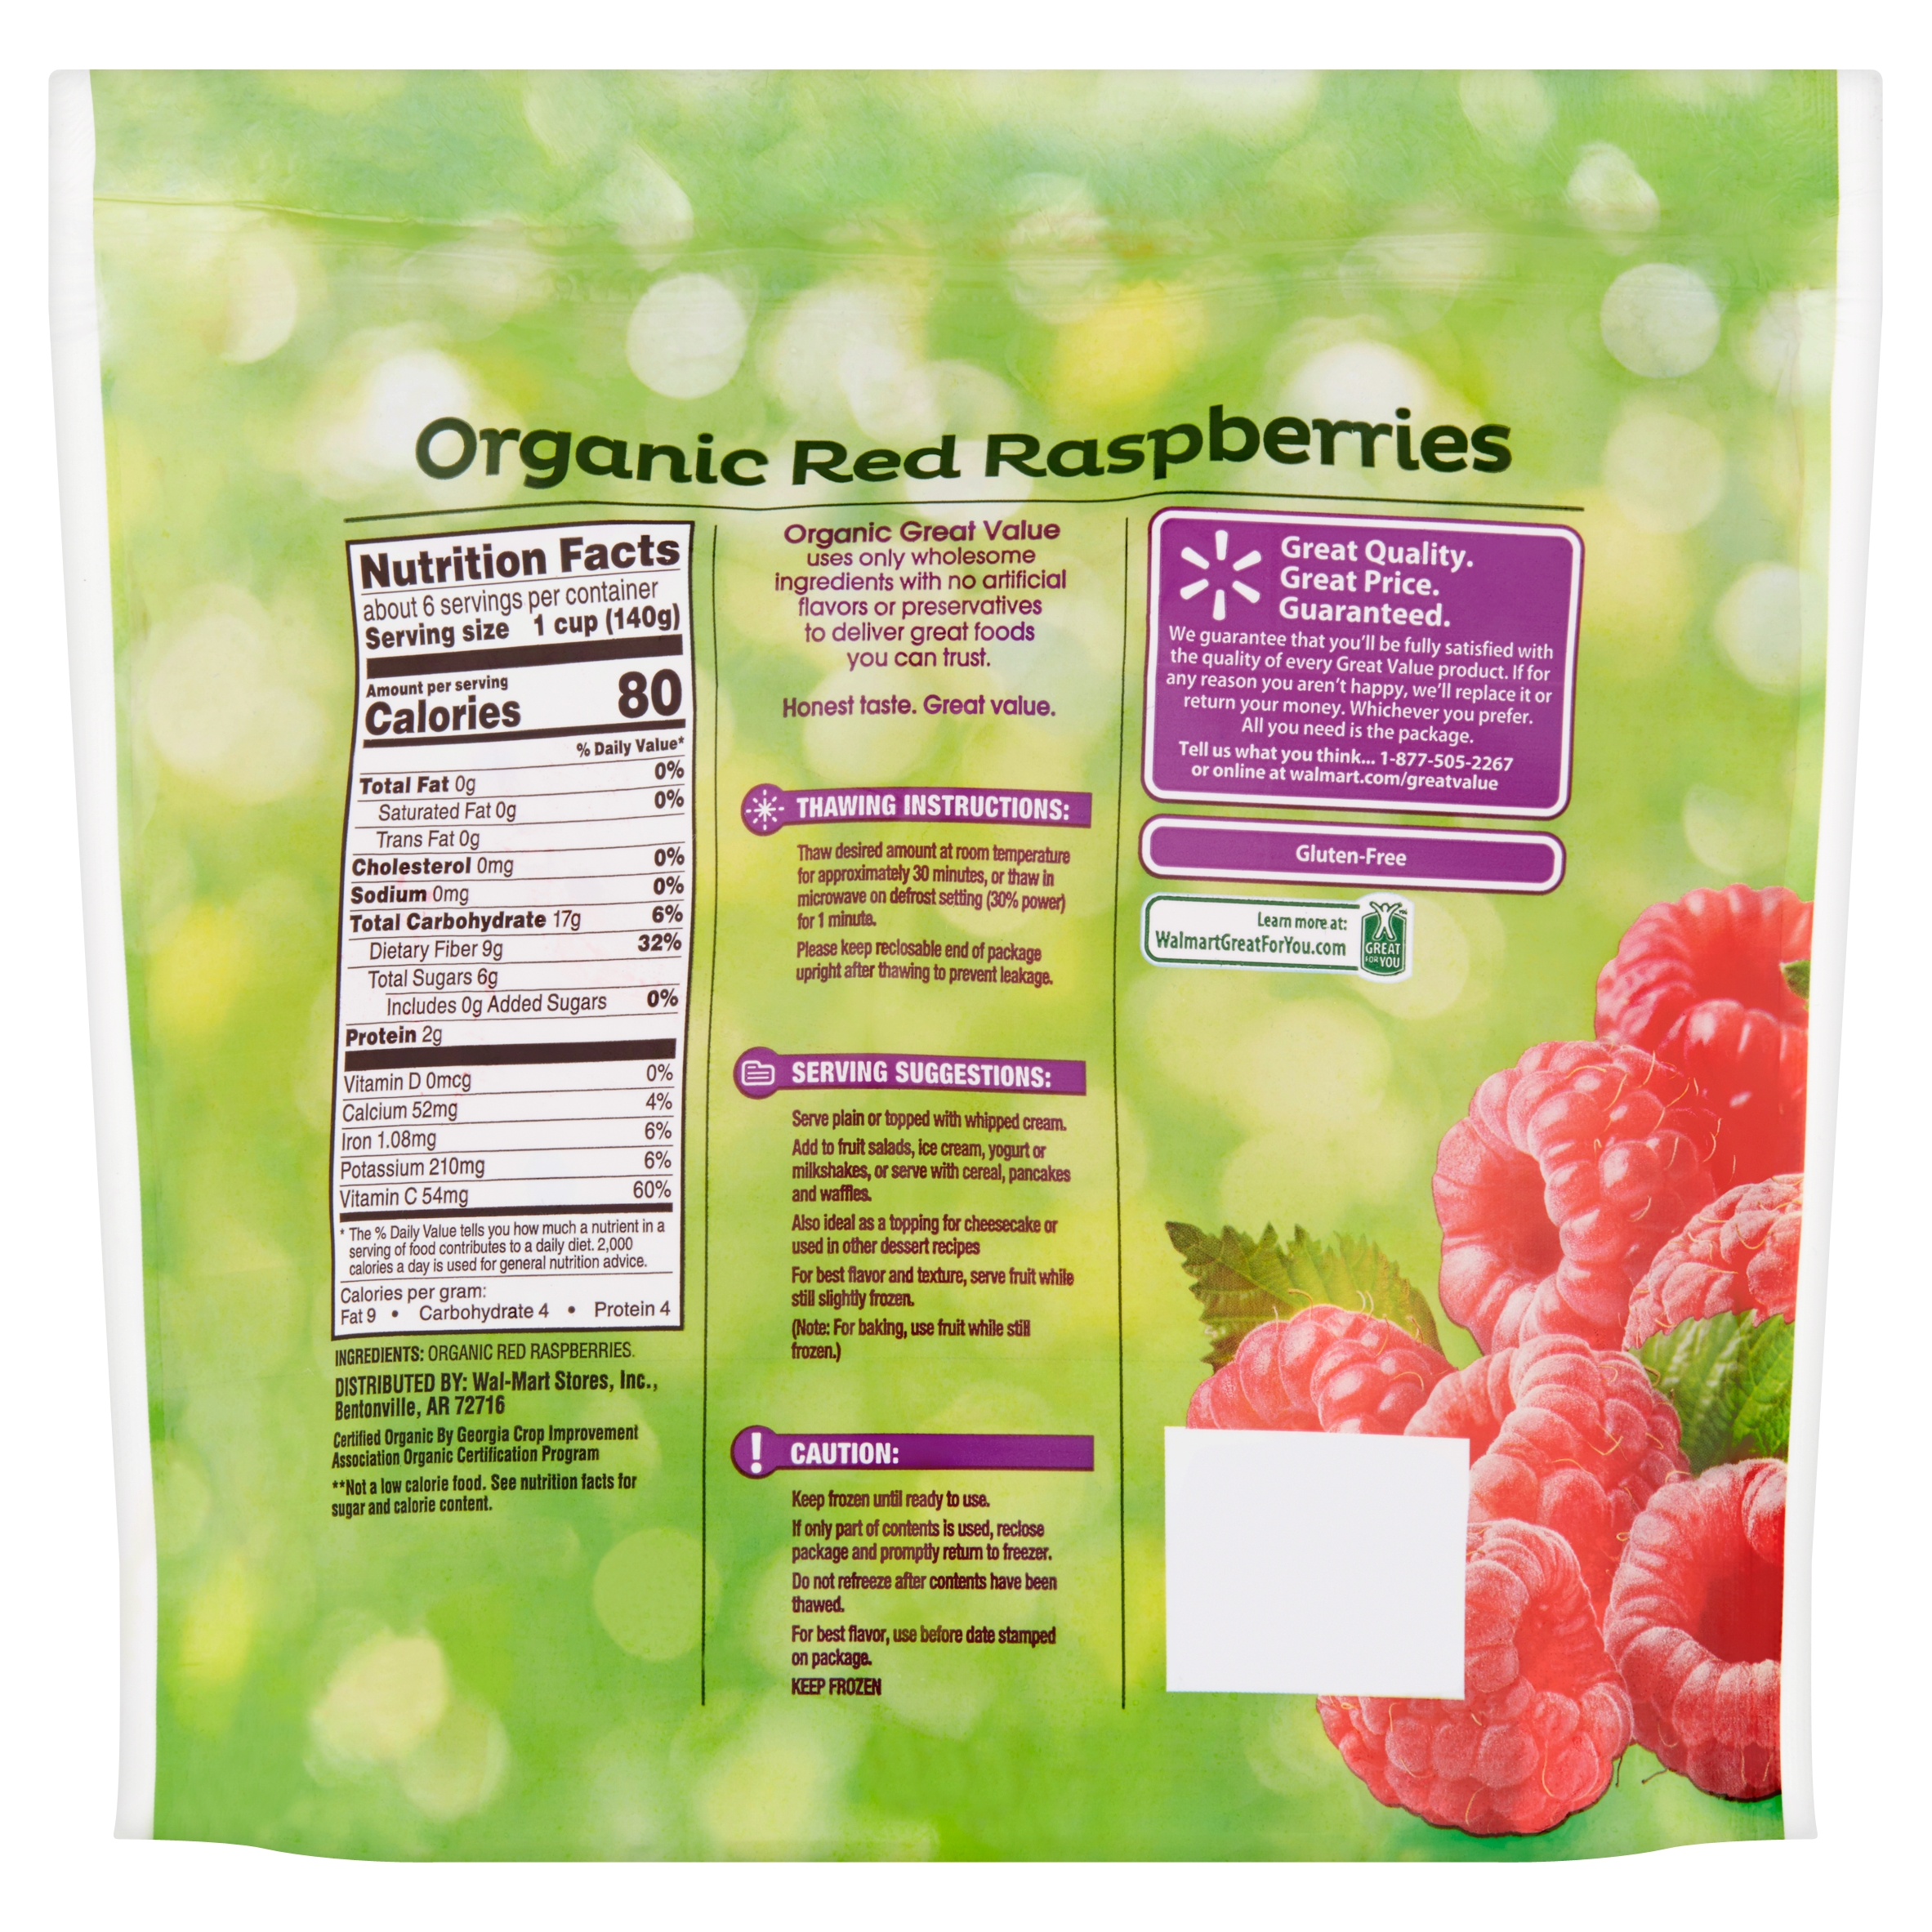 Great Value FrOzen Organic Red Raspberries, 32 Oz - image 5 of 8